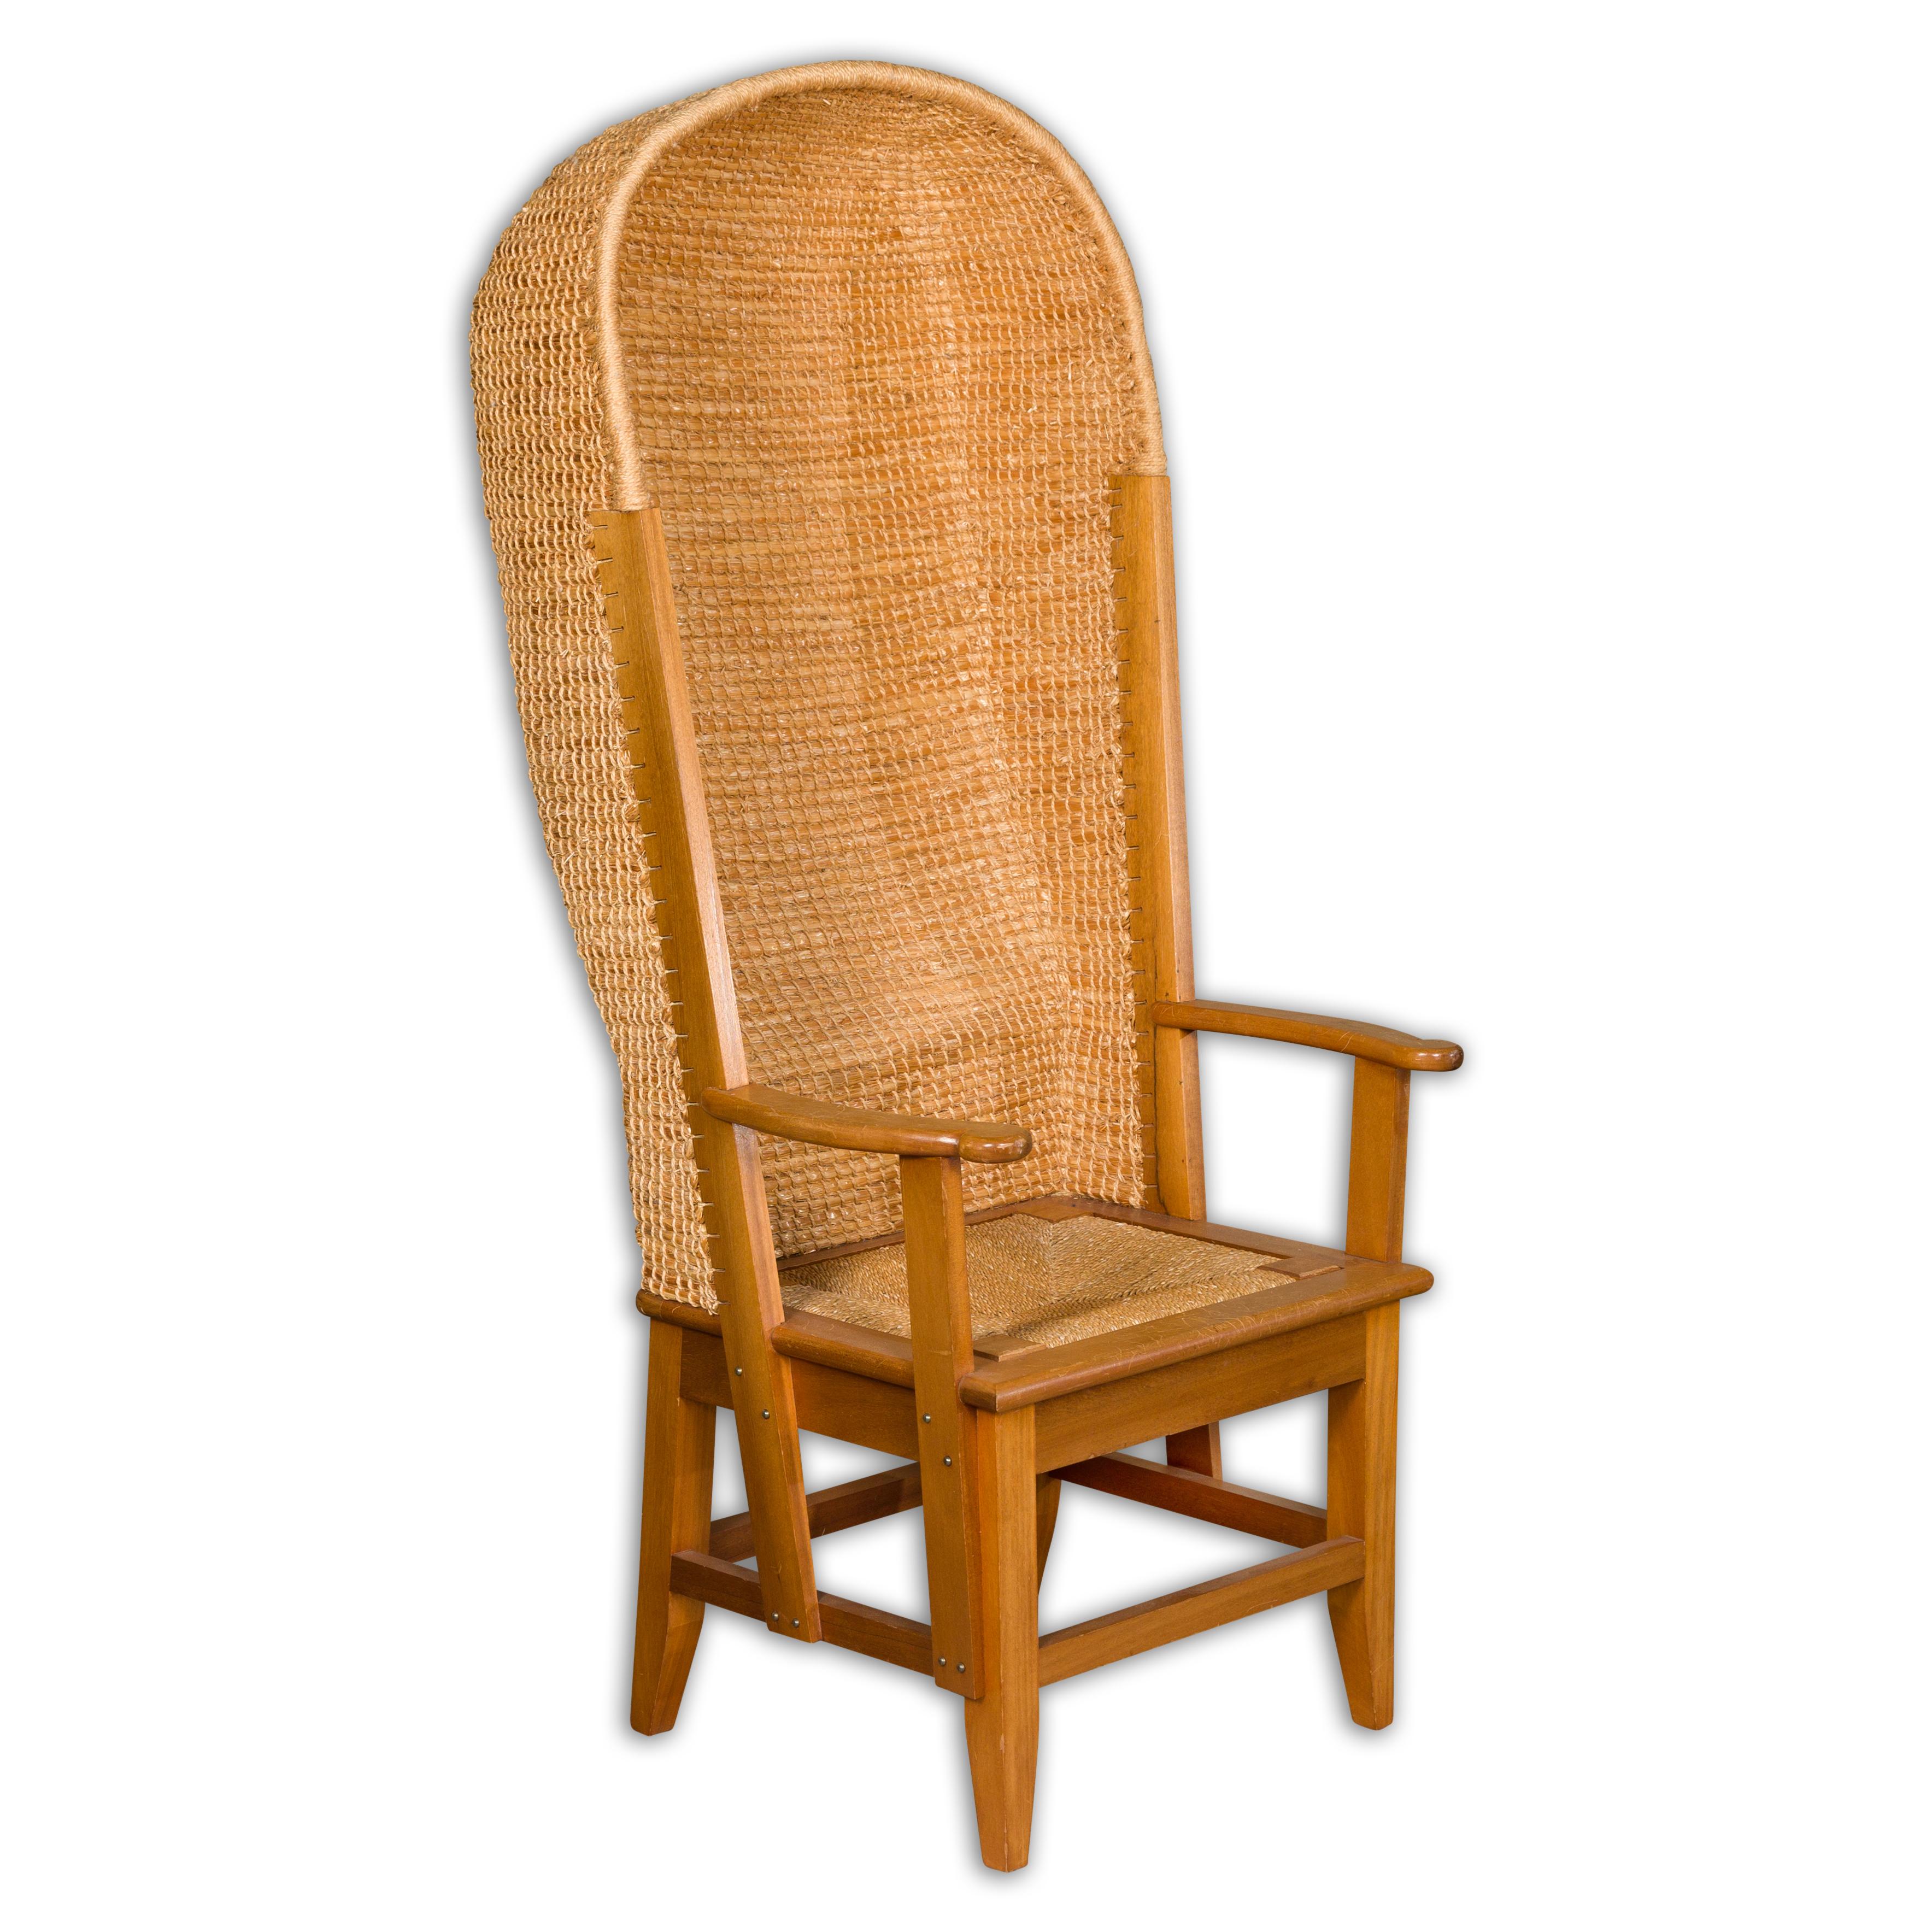 A Scottish Orkney Island canopy chair from the mid 20th century with handwoven straw hooded back, rush seat, open serpentine arms, tapered legs and side stretchers. A charming Scottish Orkney Island canopy chair from the mid-20th century, seamlessly